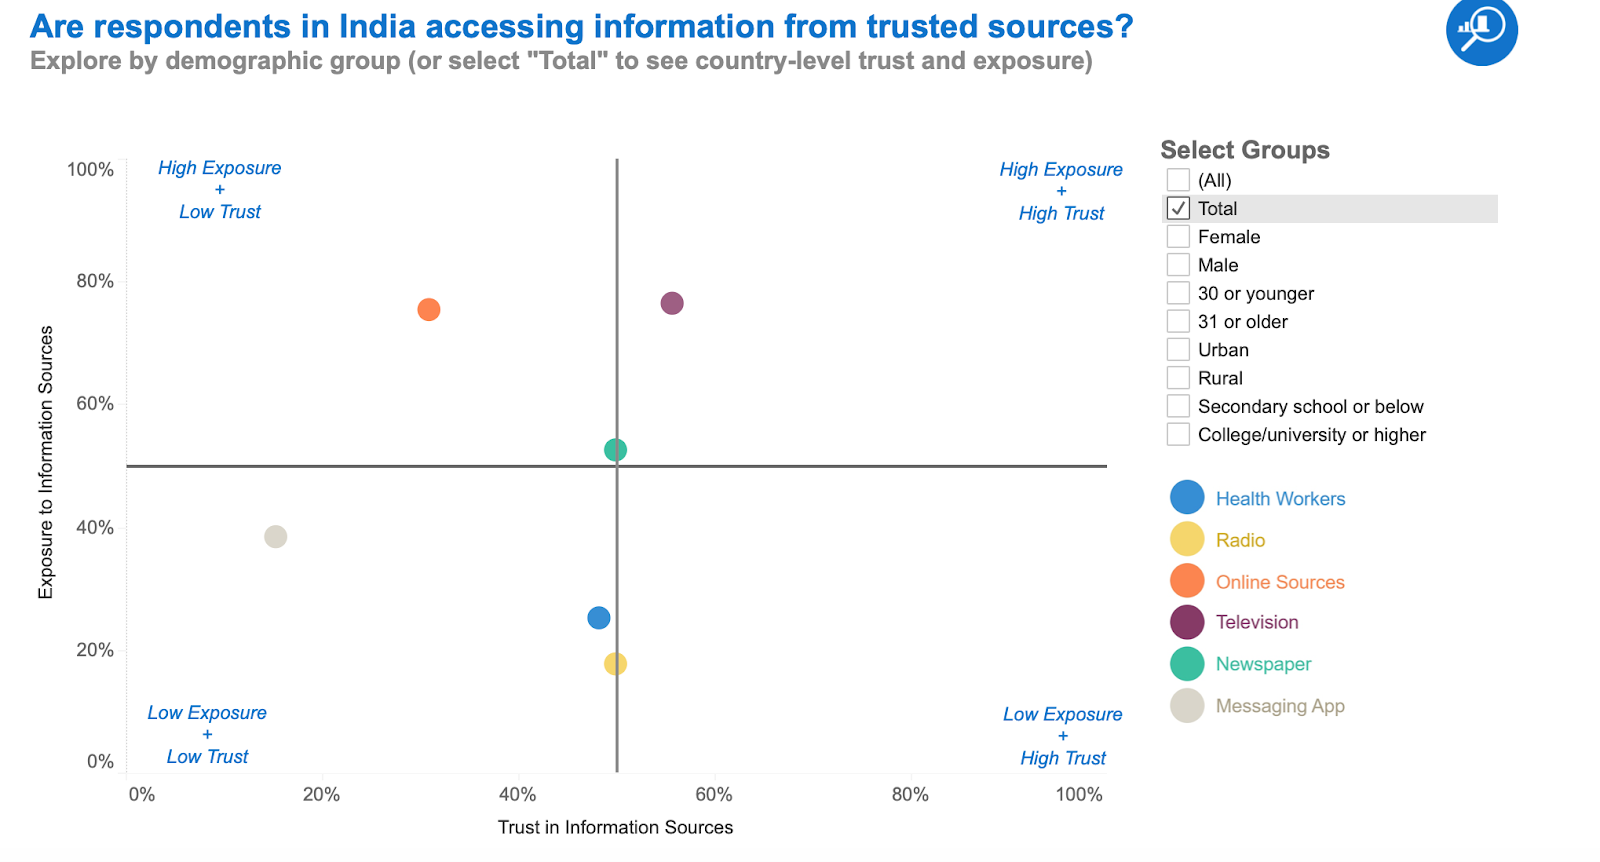 Are respondents in India accessing information from trusted sources?